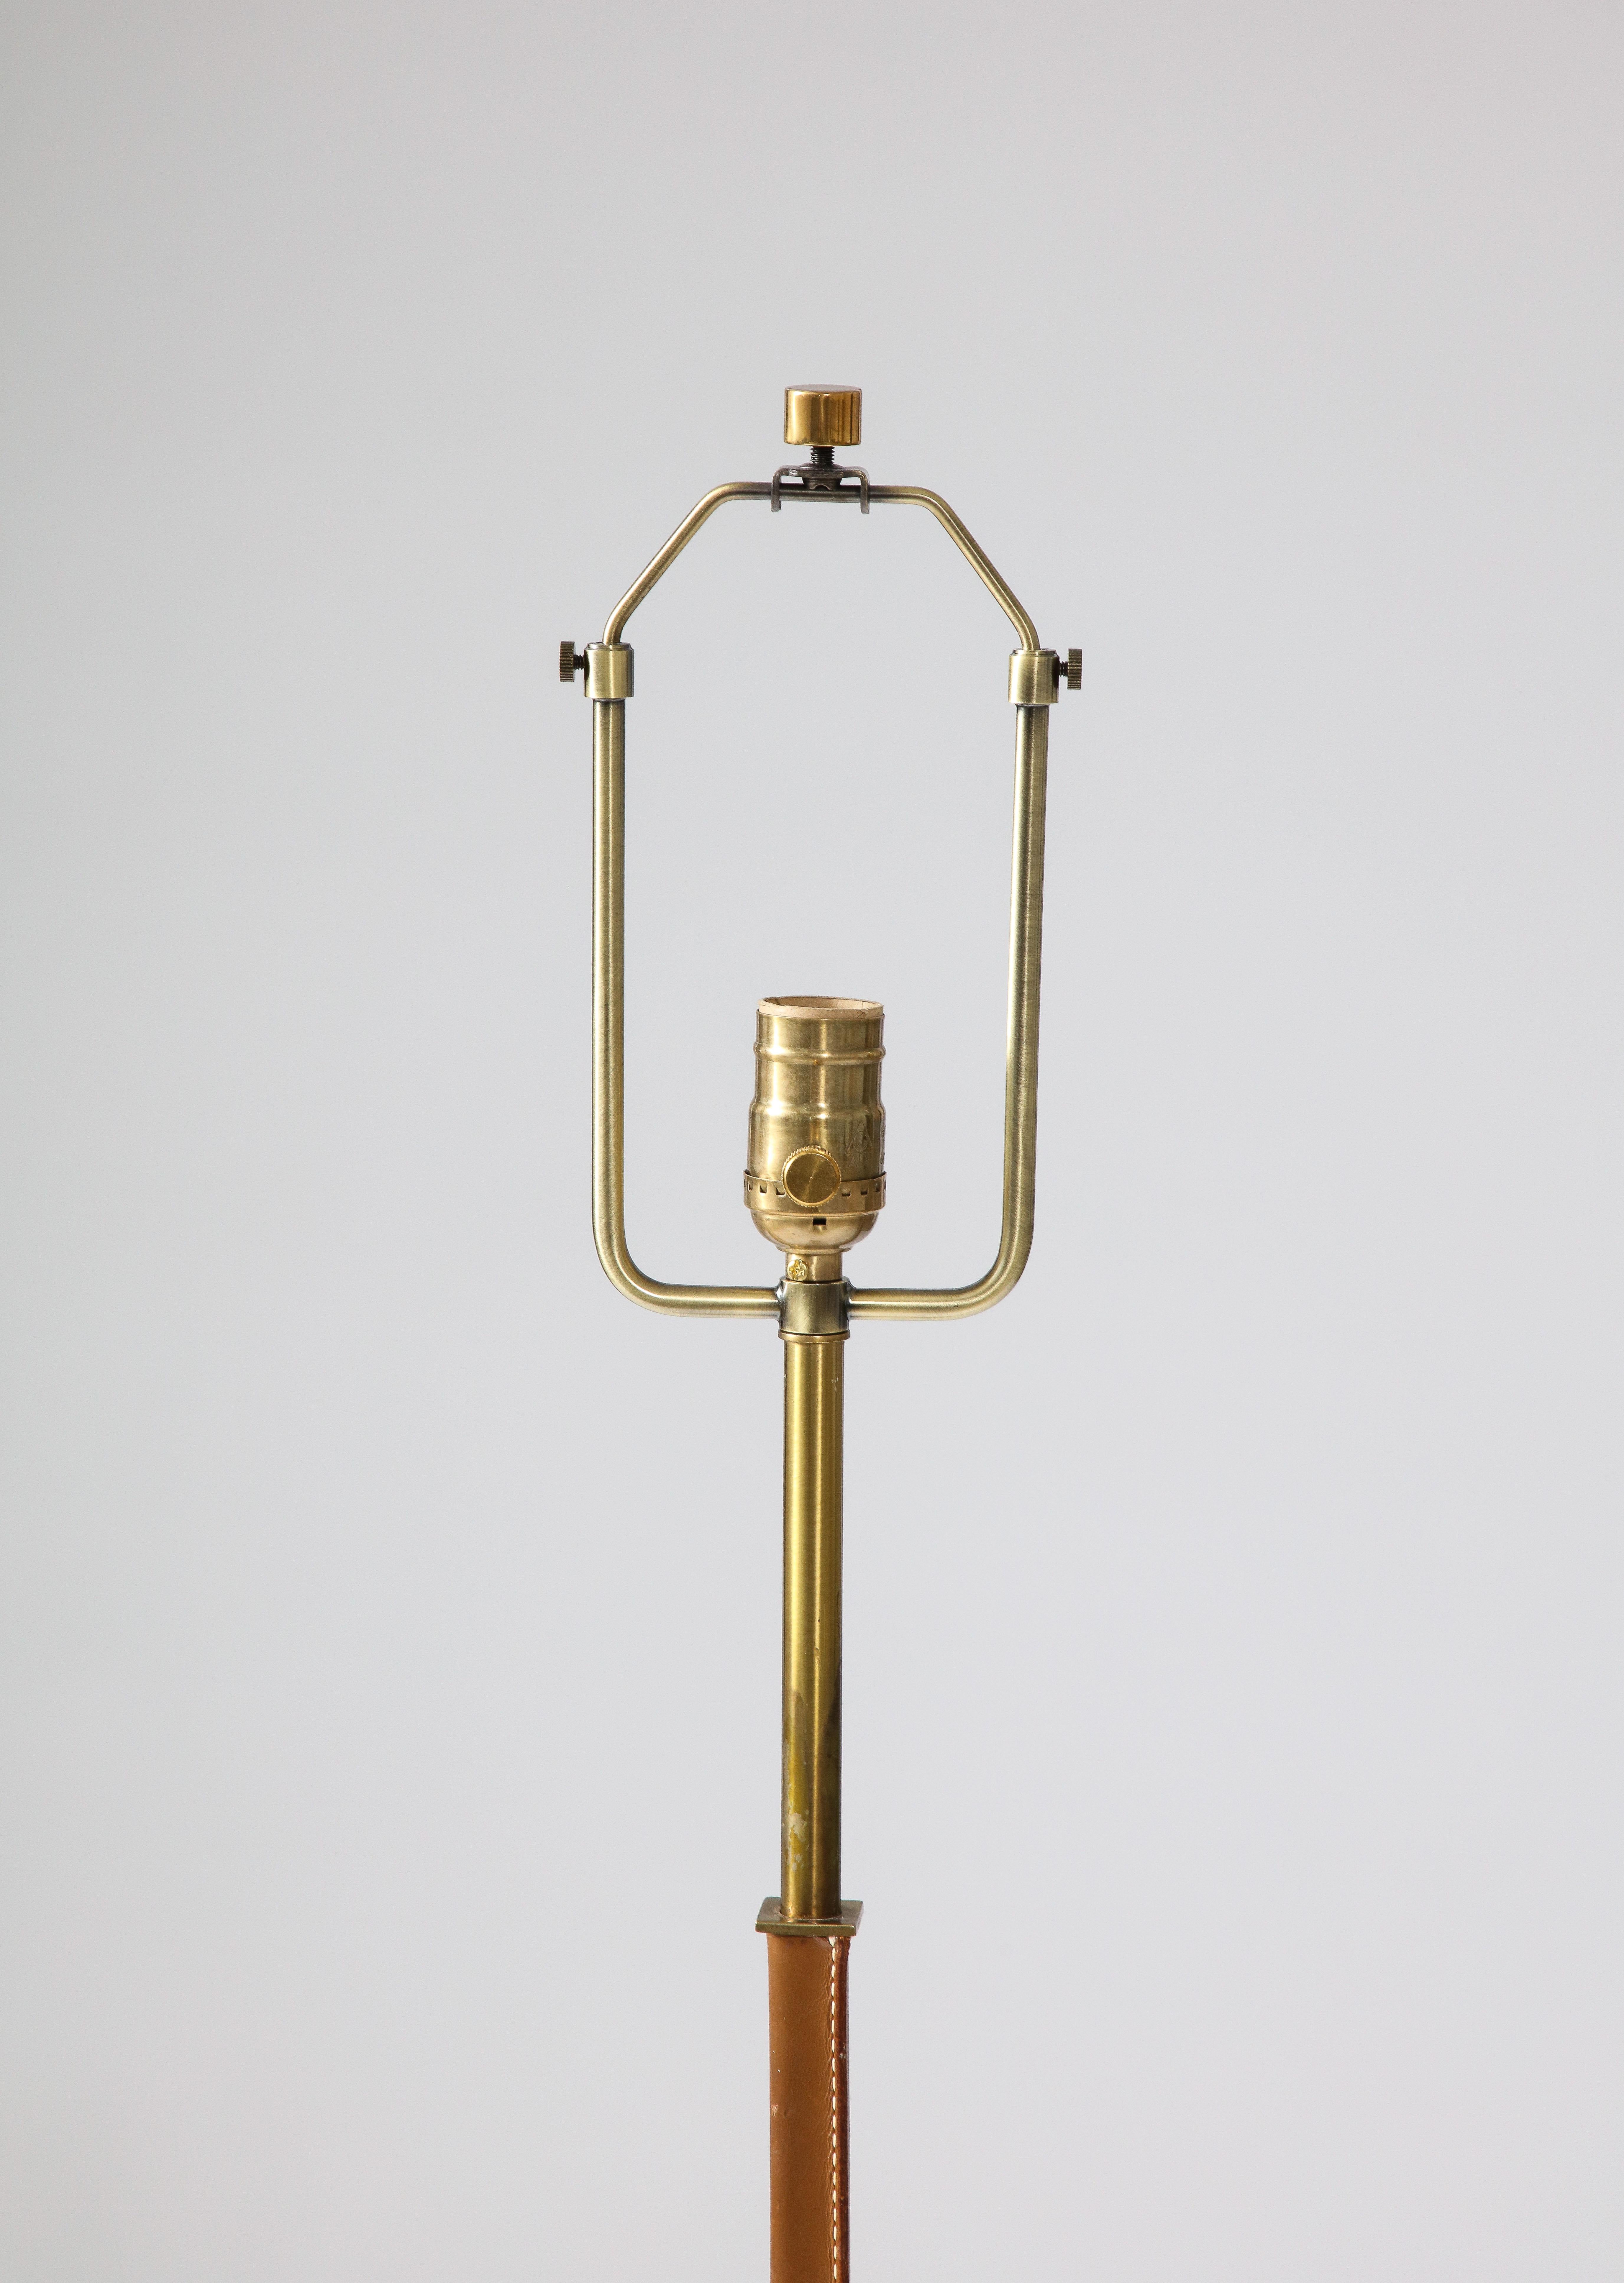 Brass and Leather Floor Lamp by Falkenbergs Belysning, Sweden, c. 1950 For Sale 4